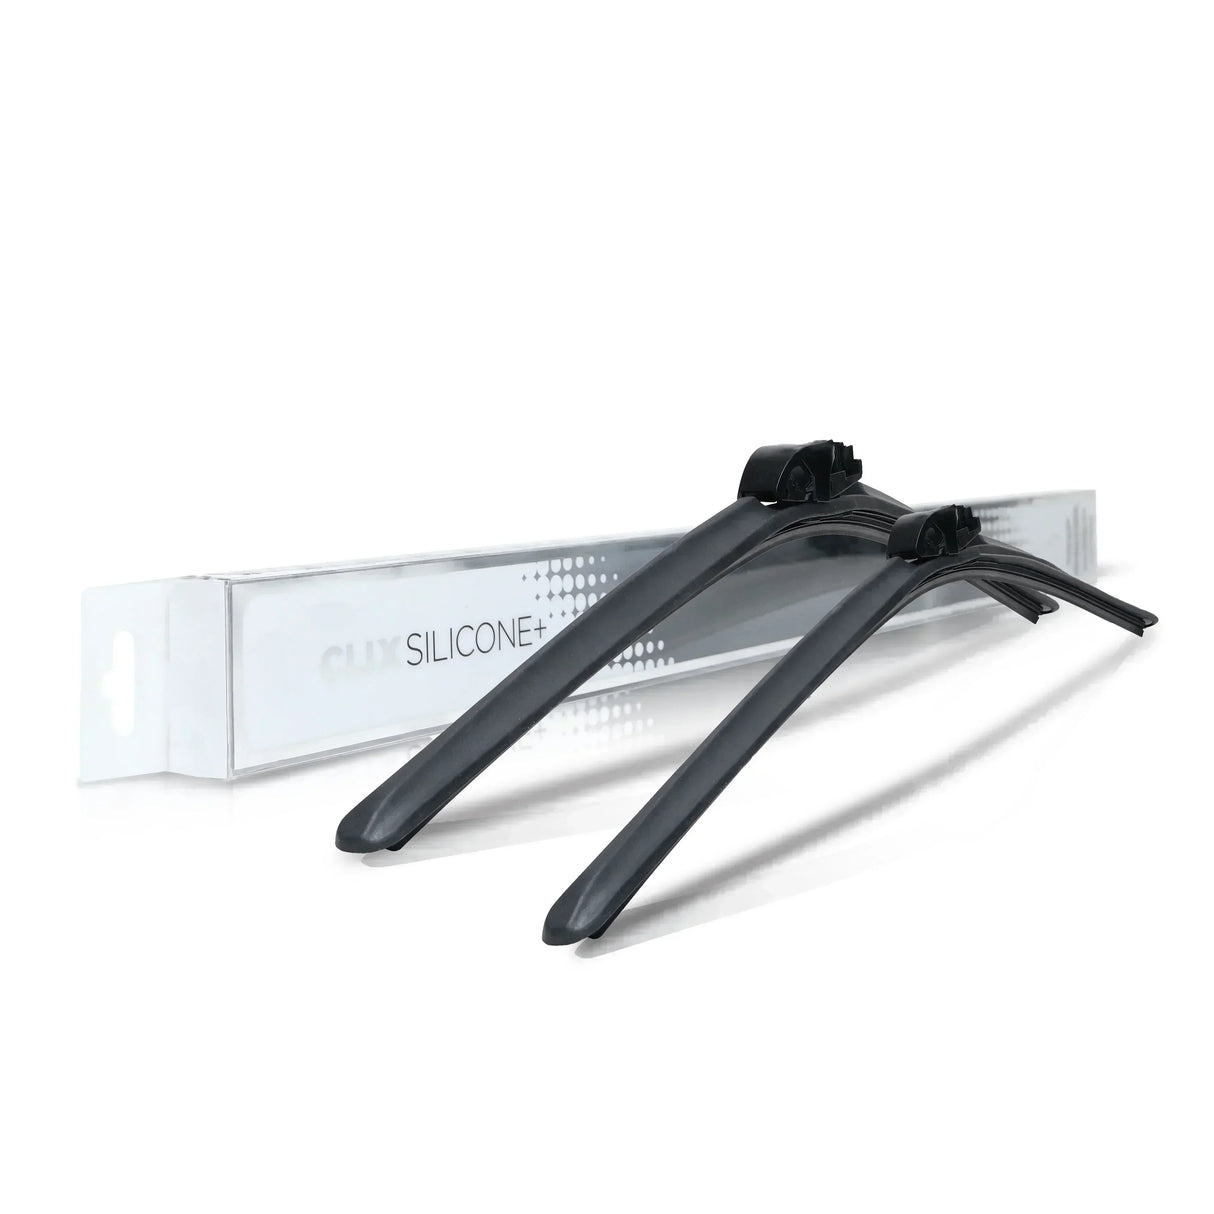 Land Rover Discovery Windshield Wiper Blades